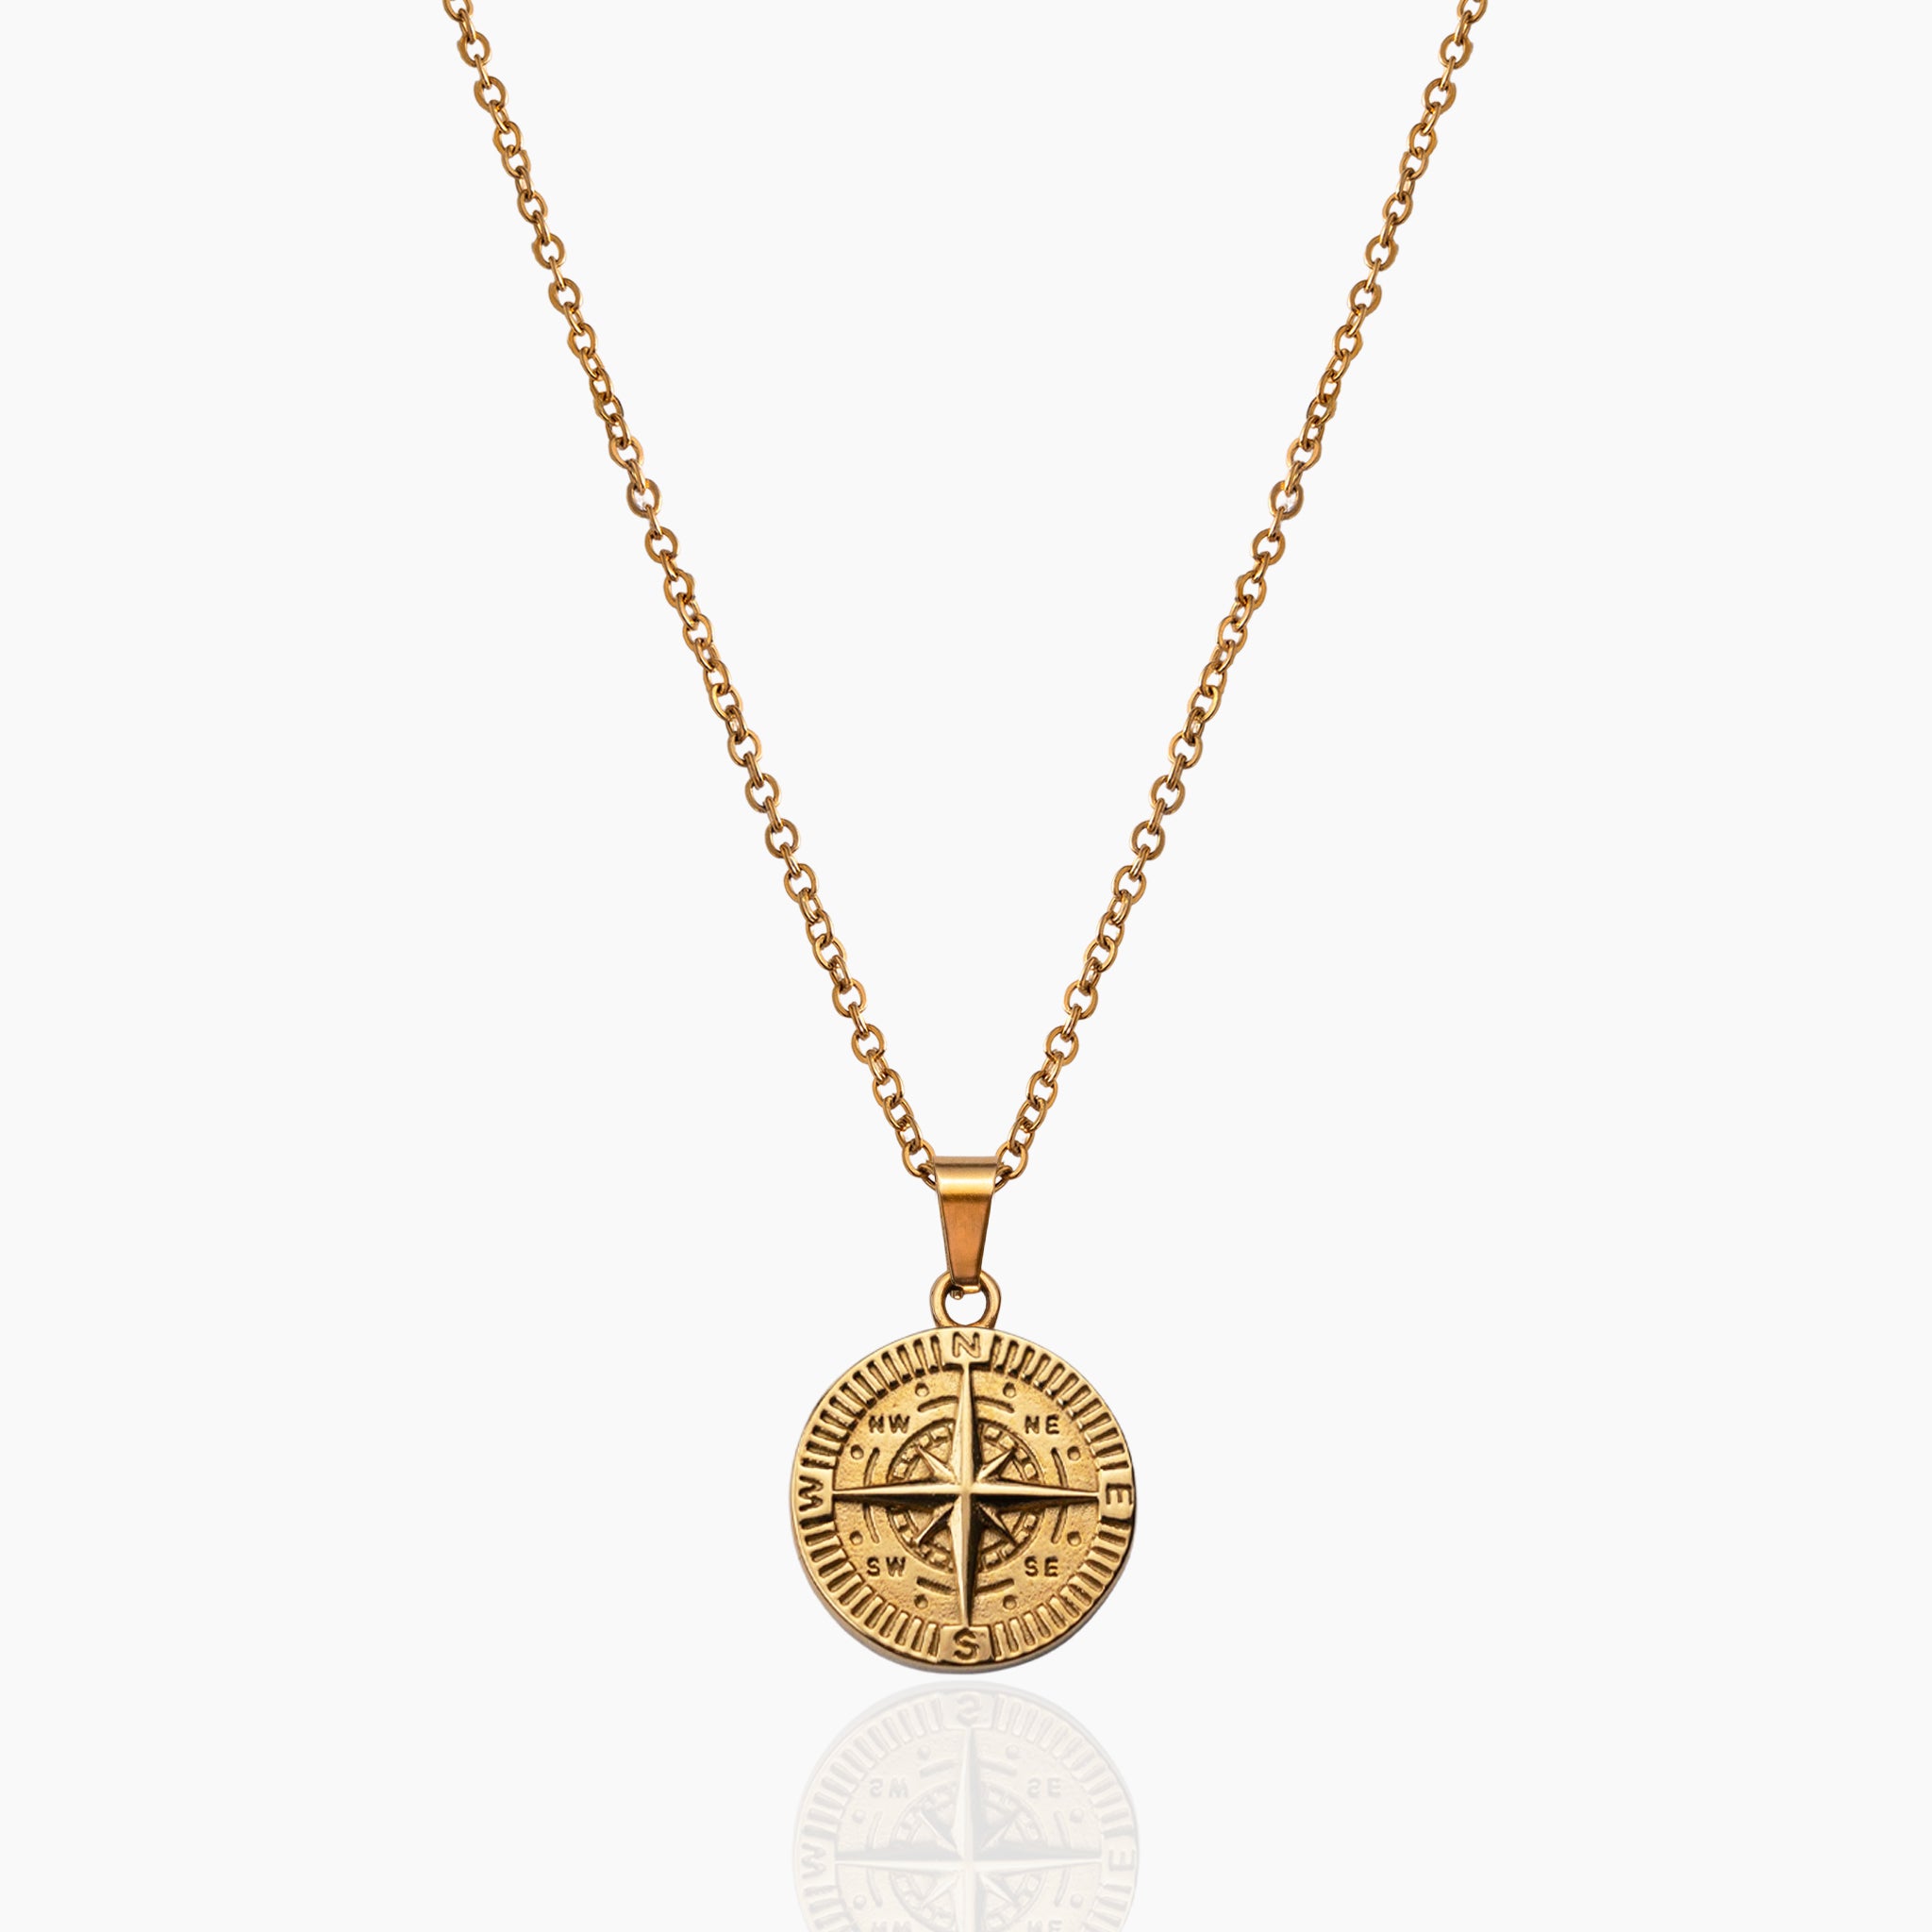 Buy Gold Compass Necklace Gold PVD Coating Compass Necklace Mens Compass  Necklace Gold North Star Necklace Vintage Necklace Wax Seal WATERPROOF  Online in India - Etsy